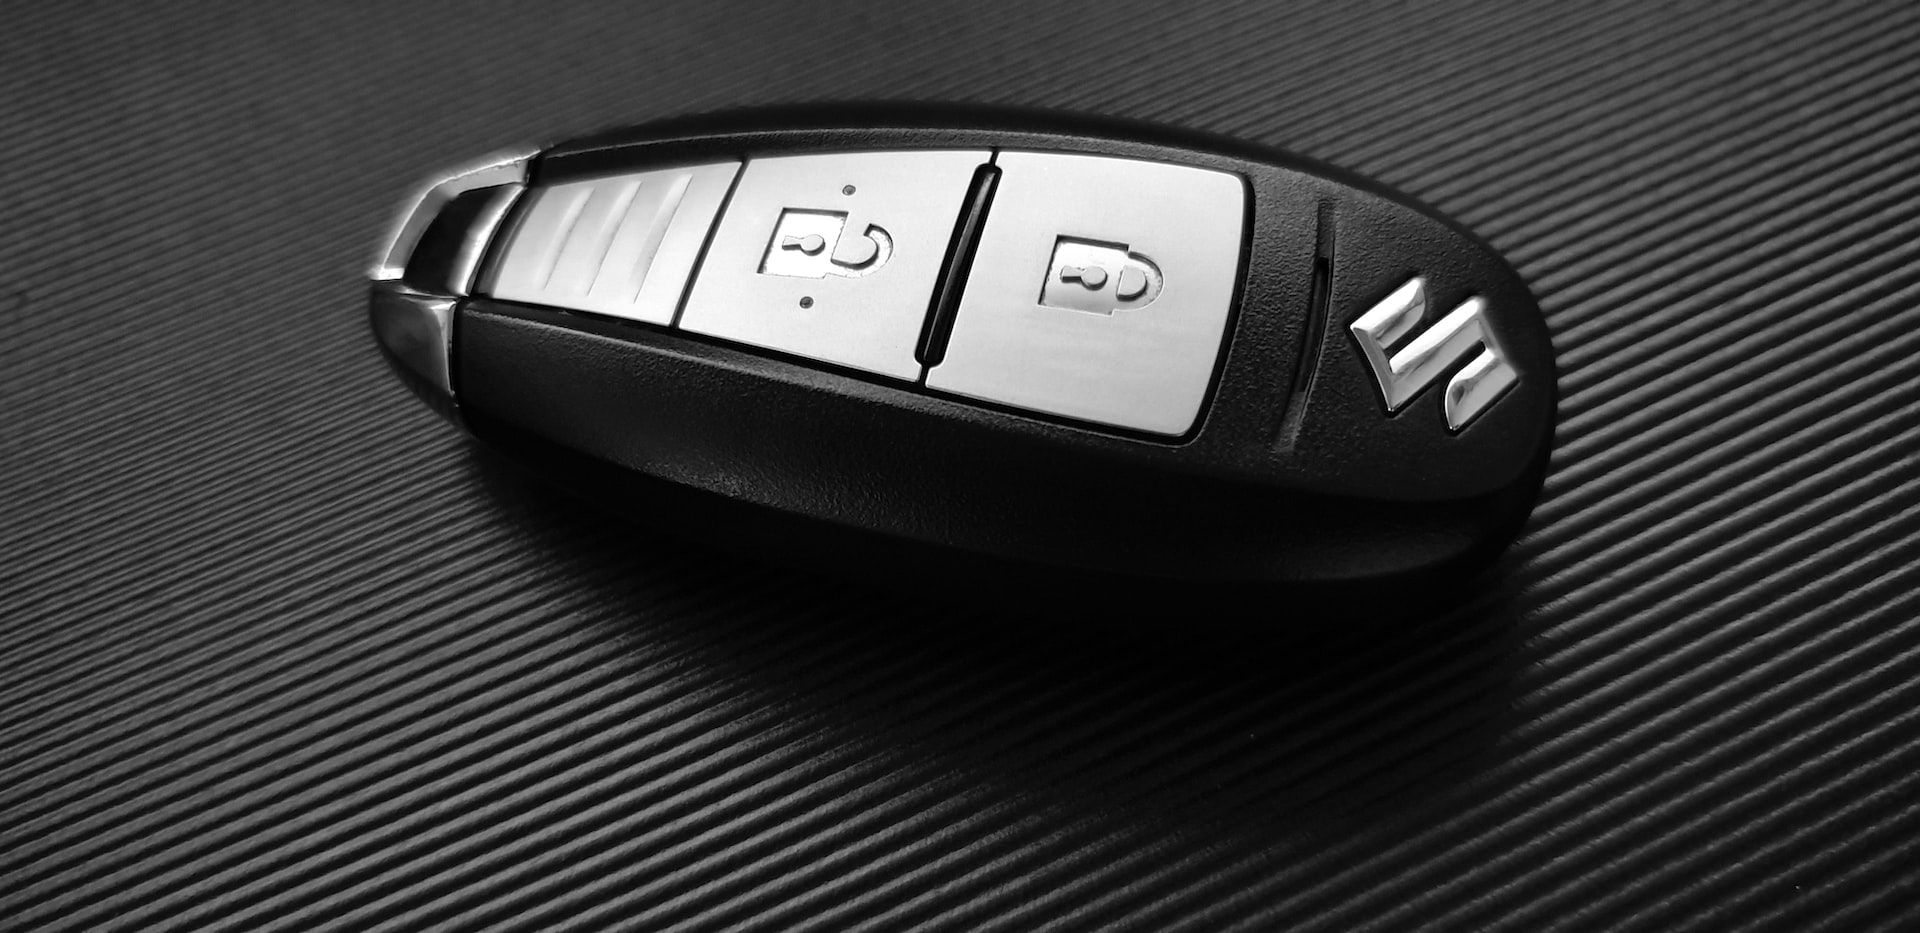 Image of a smart key fob from Suzuki